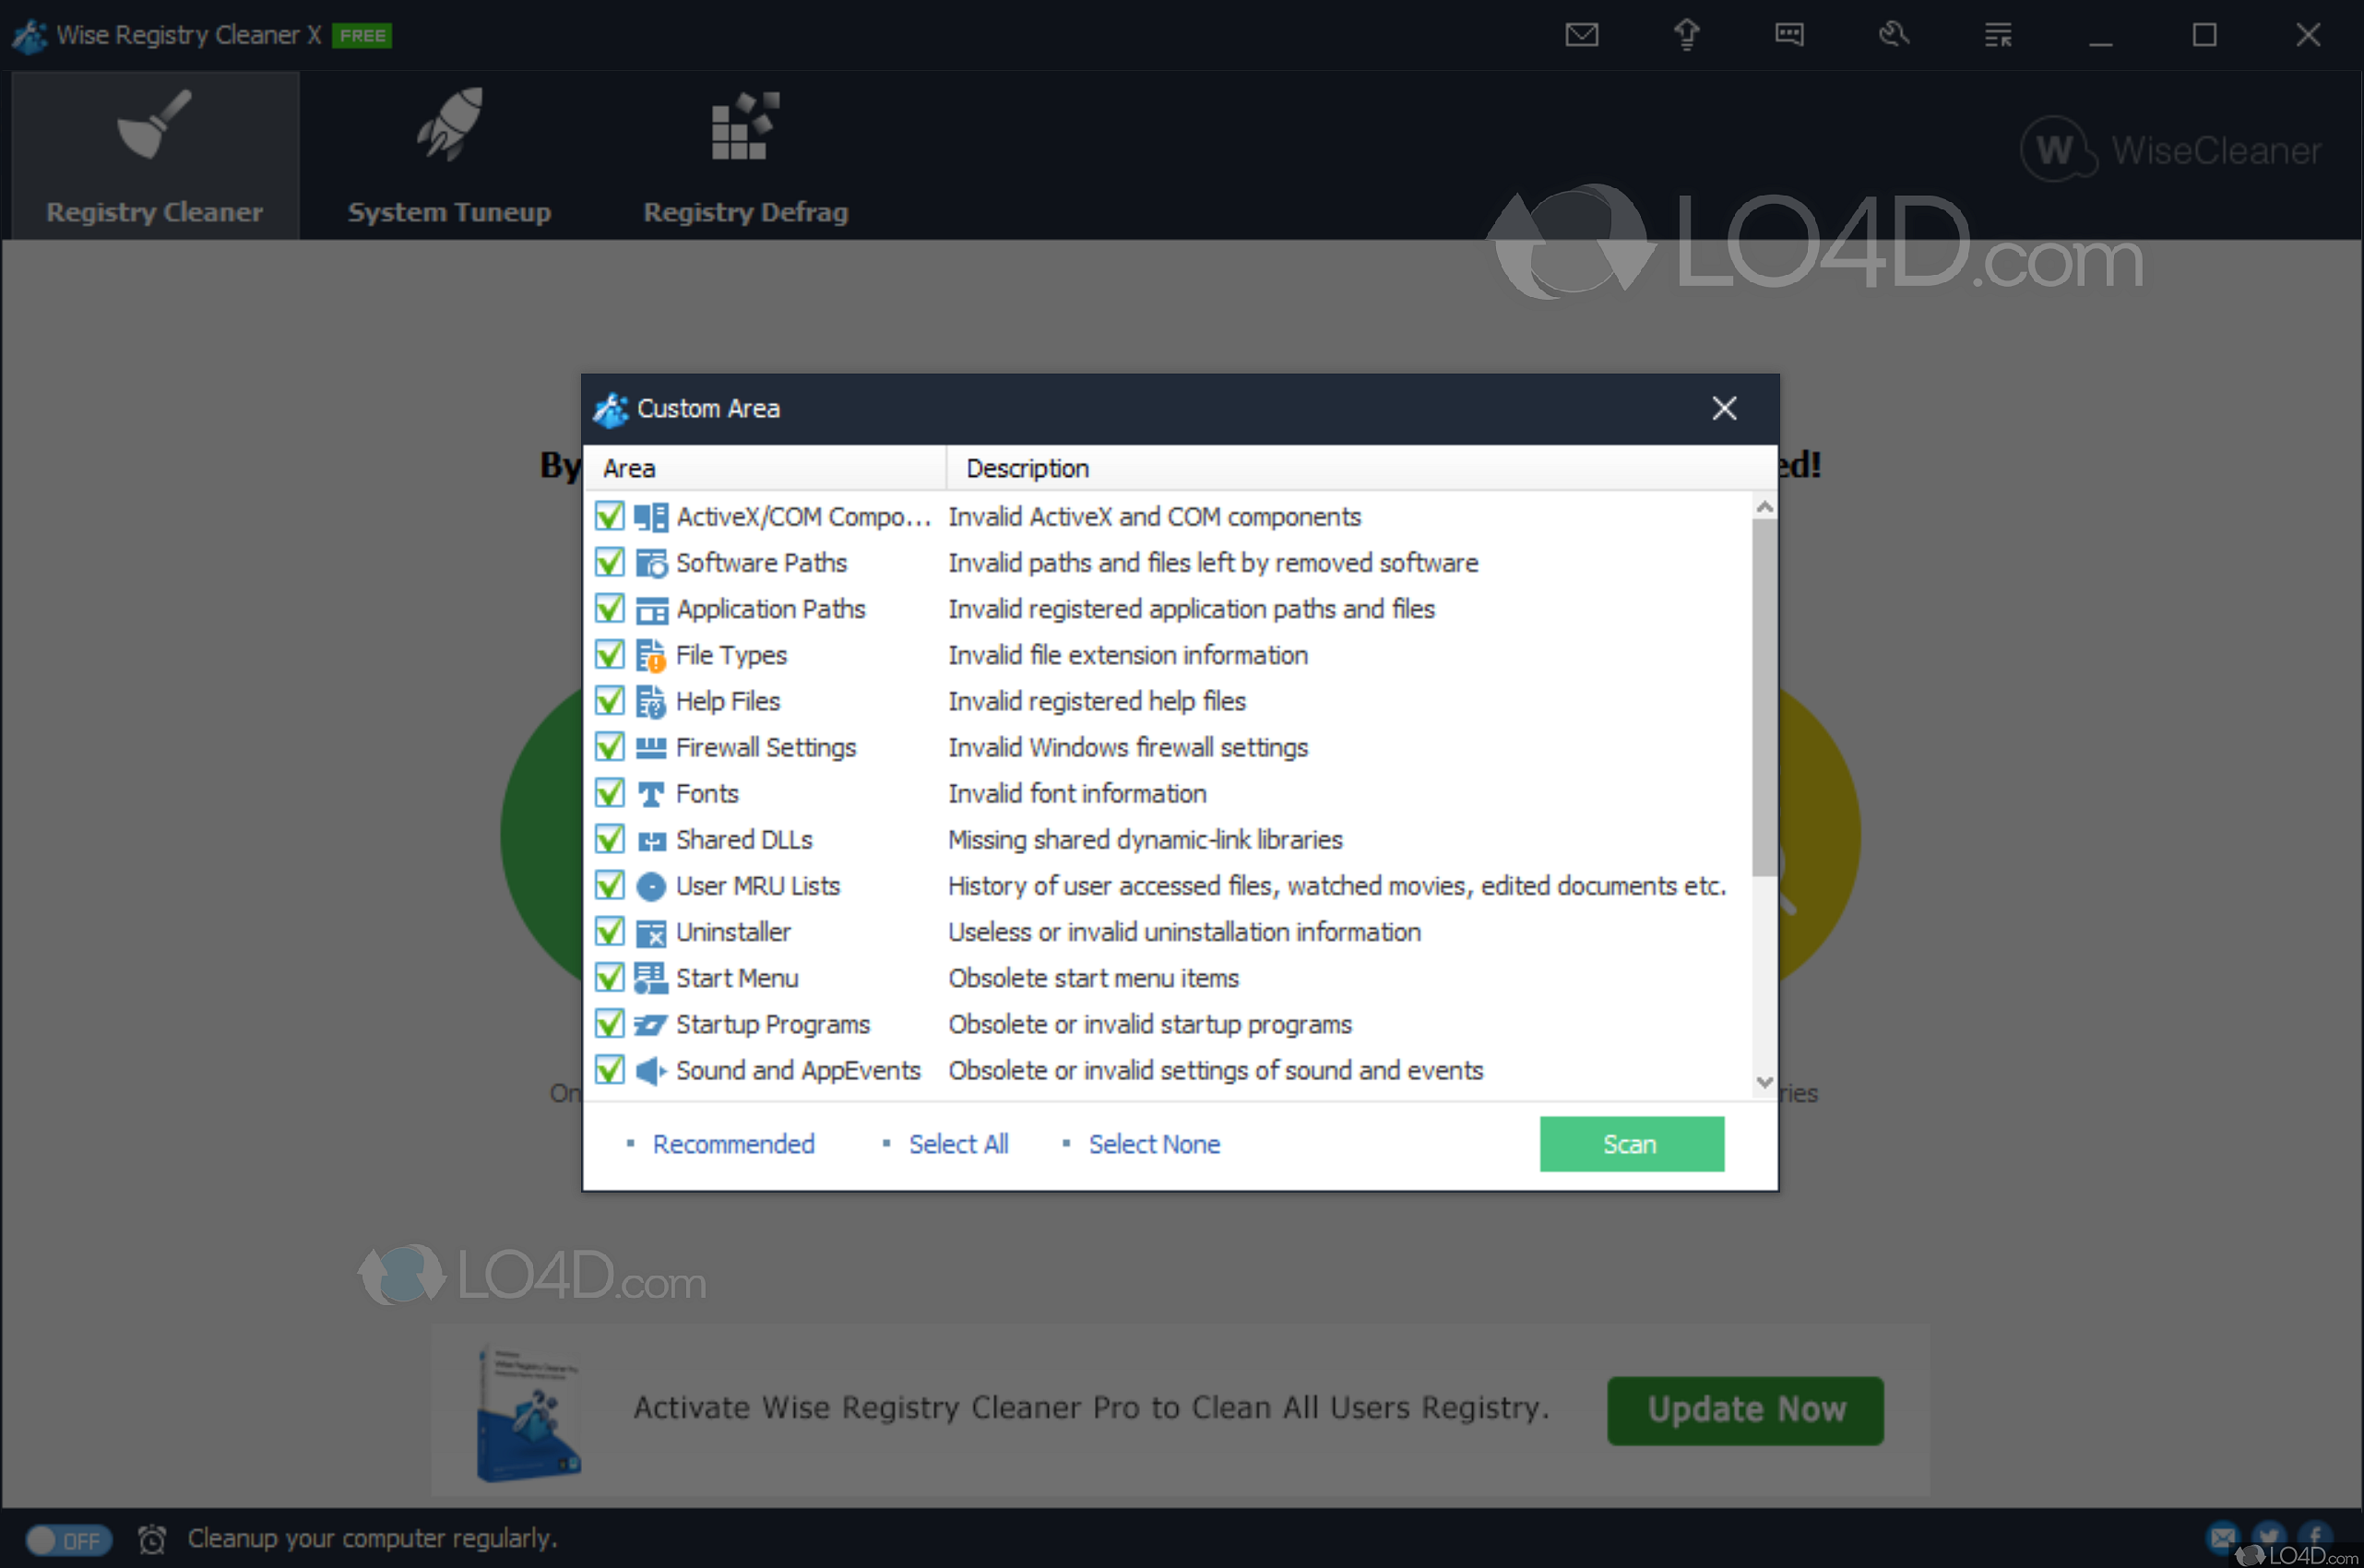 instal the new Wise Registry Cleaner Pro 11.0.3.714